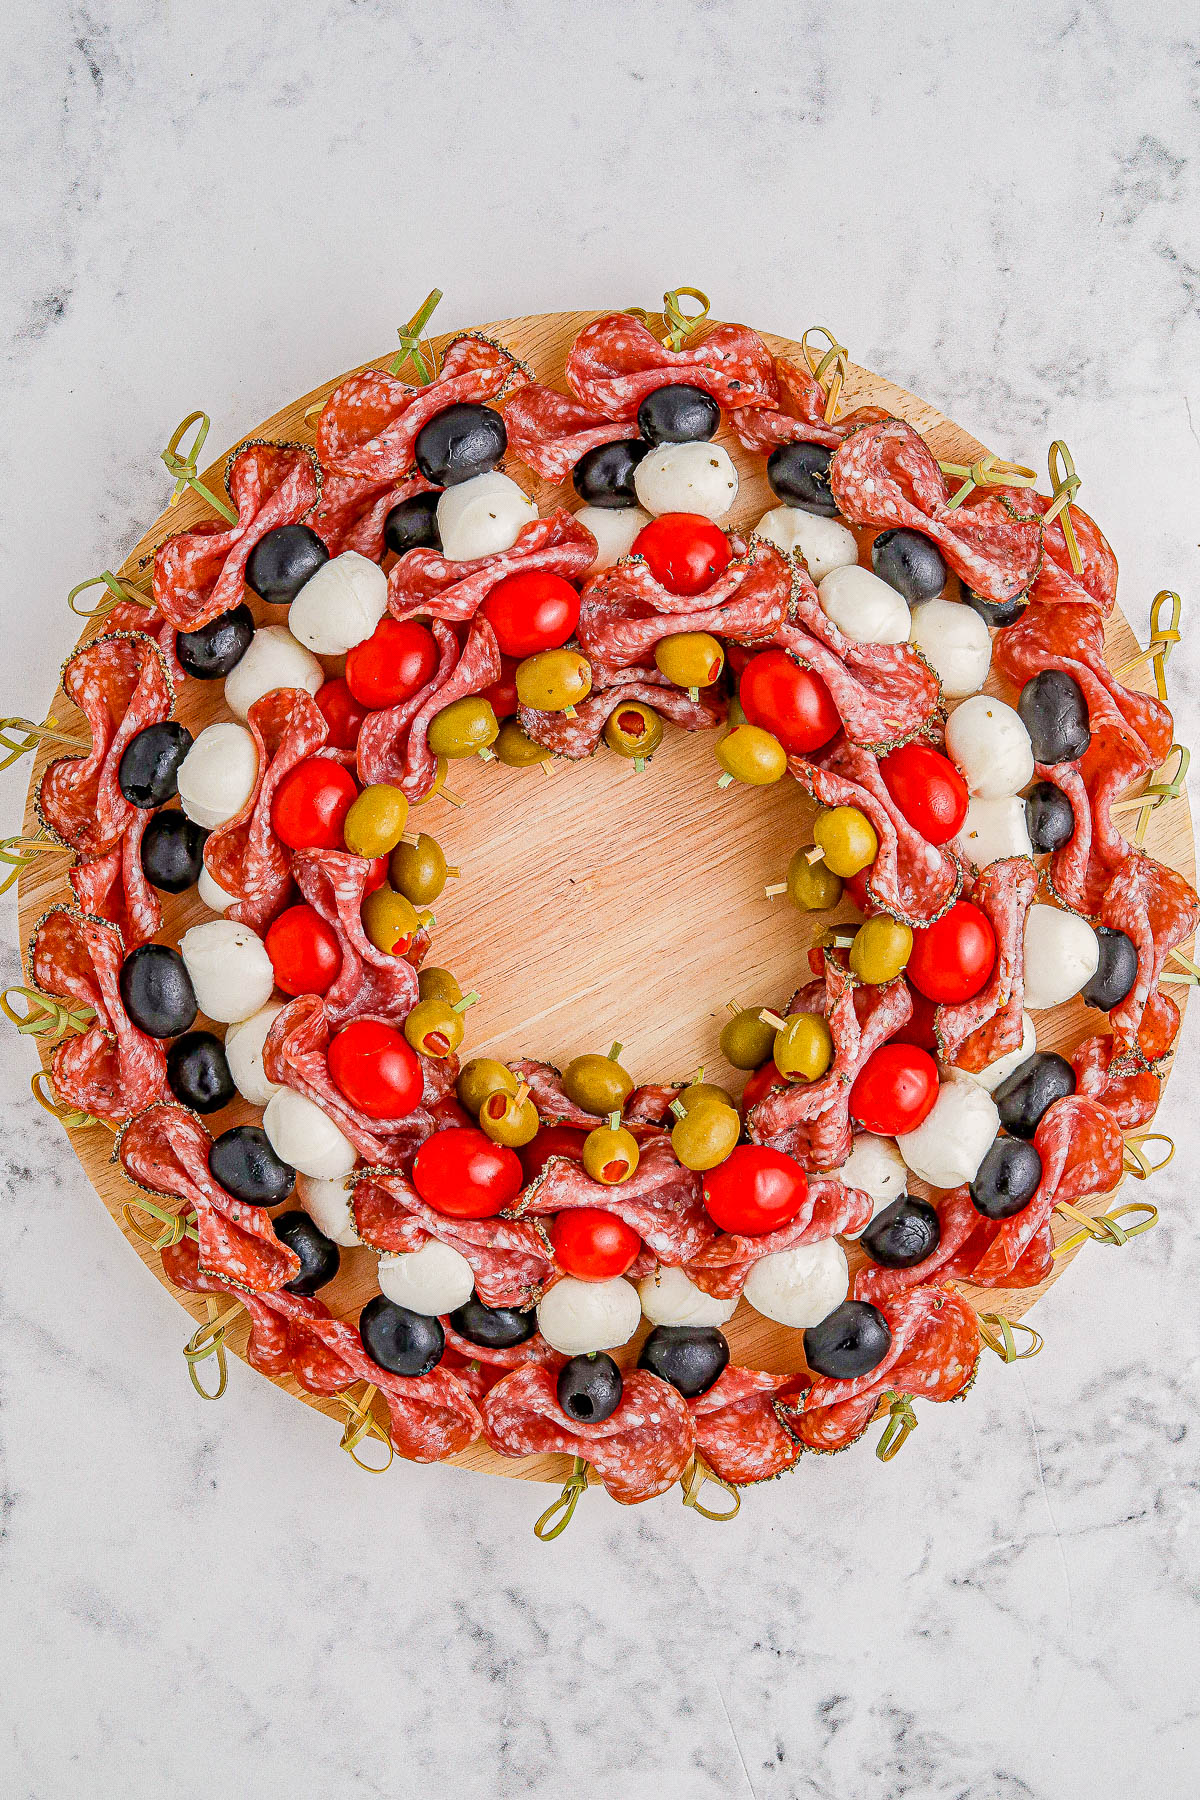 Holiday Antipasto Wreath - A fun and festive Christmas or New Year's Eve appetizer recipe idea that's so FAST and EASY to make! Skewered salami, mozzarella, tomatoes, olives, fresh herbs, and more come together to form the wreath. Mix-and-match the ingredients based on your favorites. You can prep it ahead of your party or event and when your guests see this, I guarantee everyone's eyes will light up!